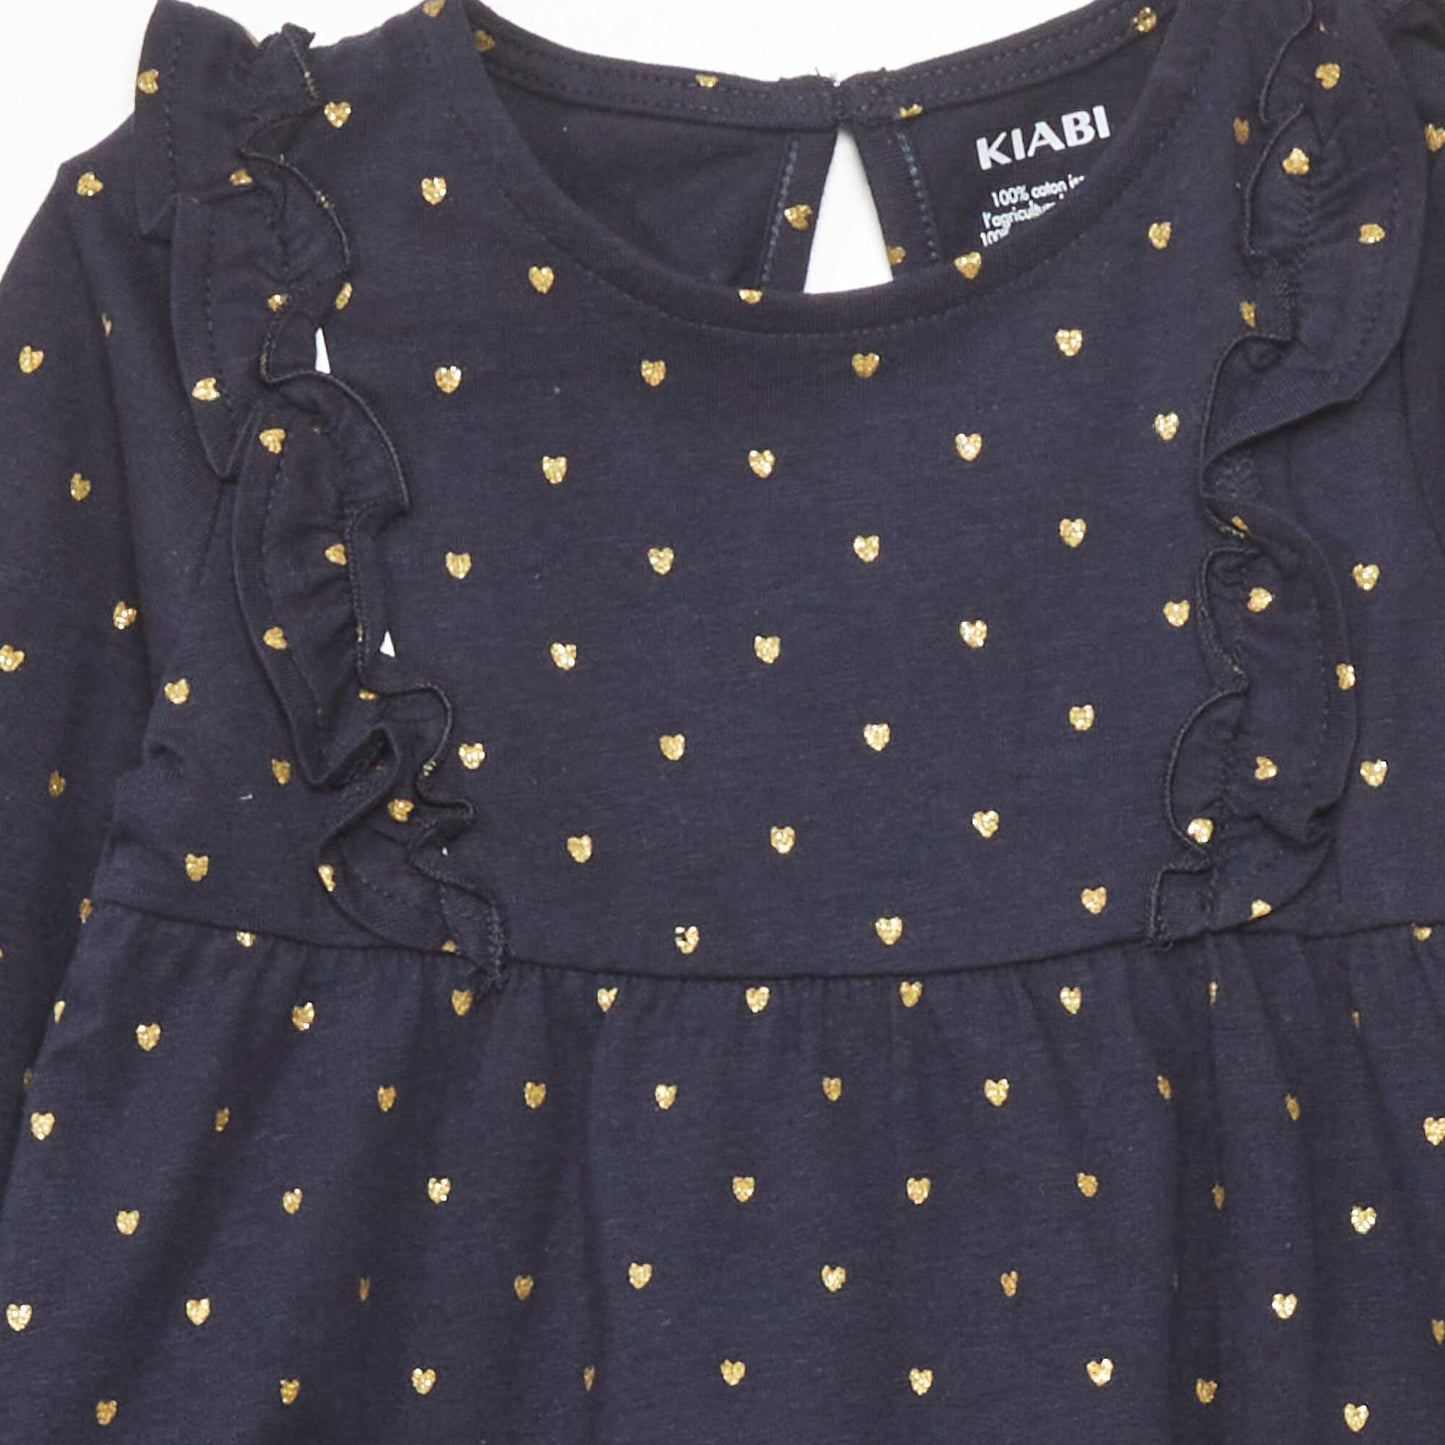 A-line dress with heart pattern NAVY HEART